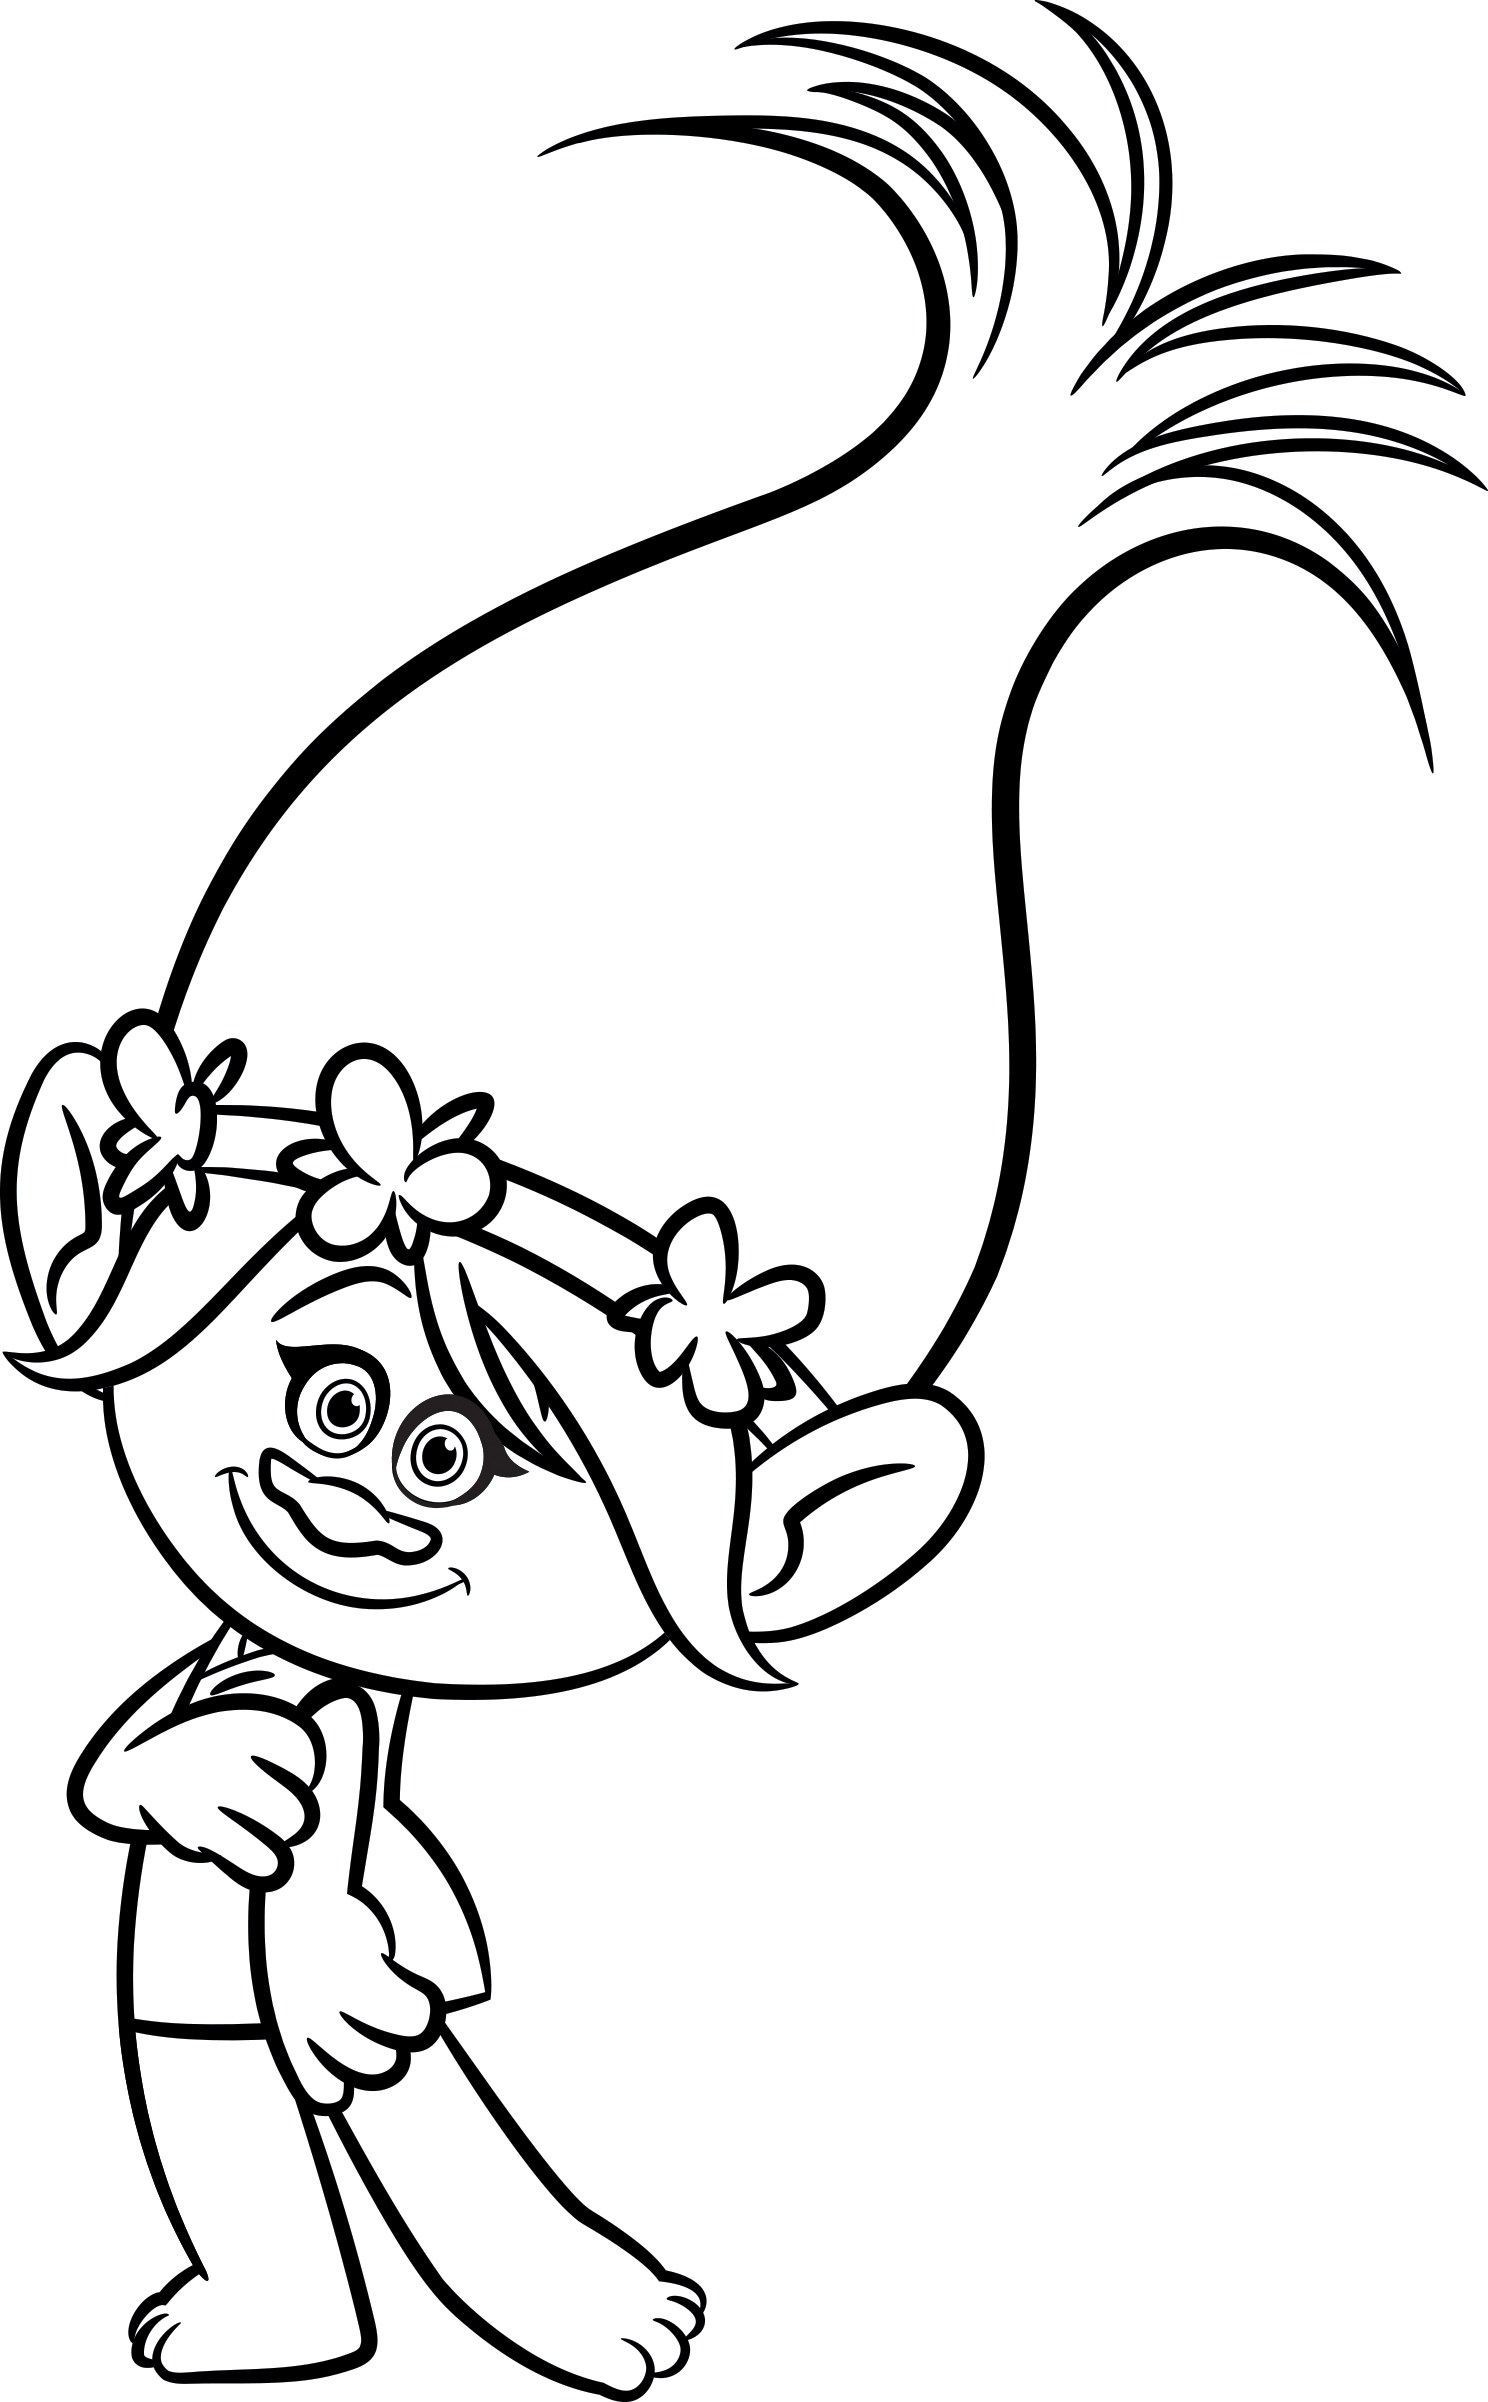 Princess Poppy Troll Coloring Page